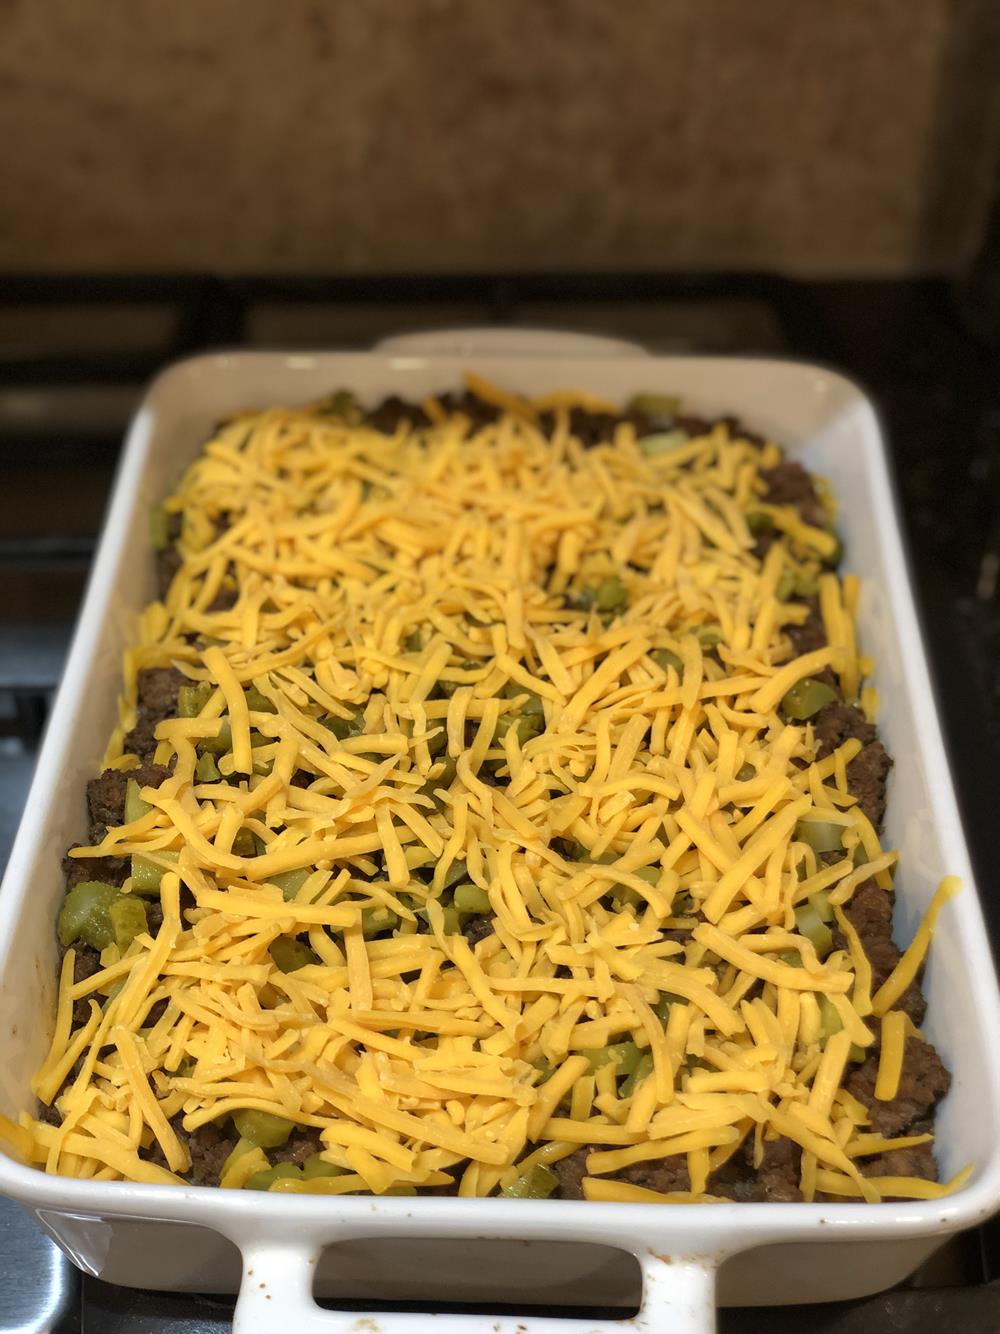 Cheeseburger Casserole Unbaked in white dish